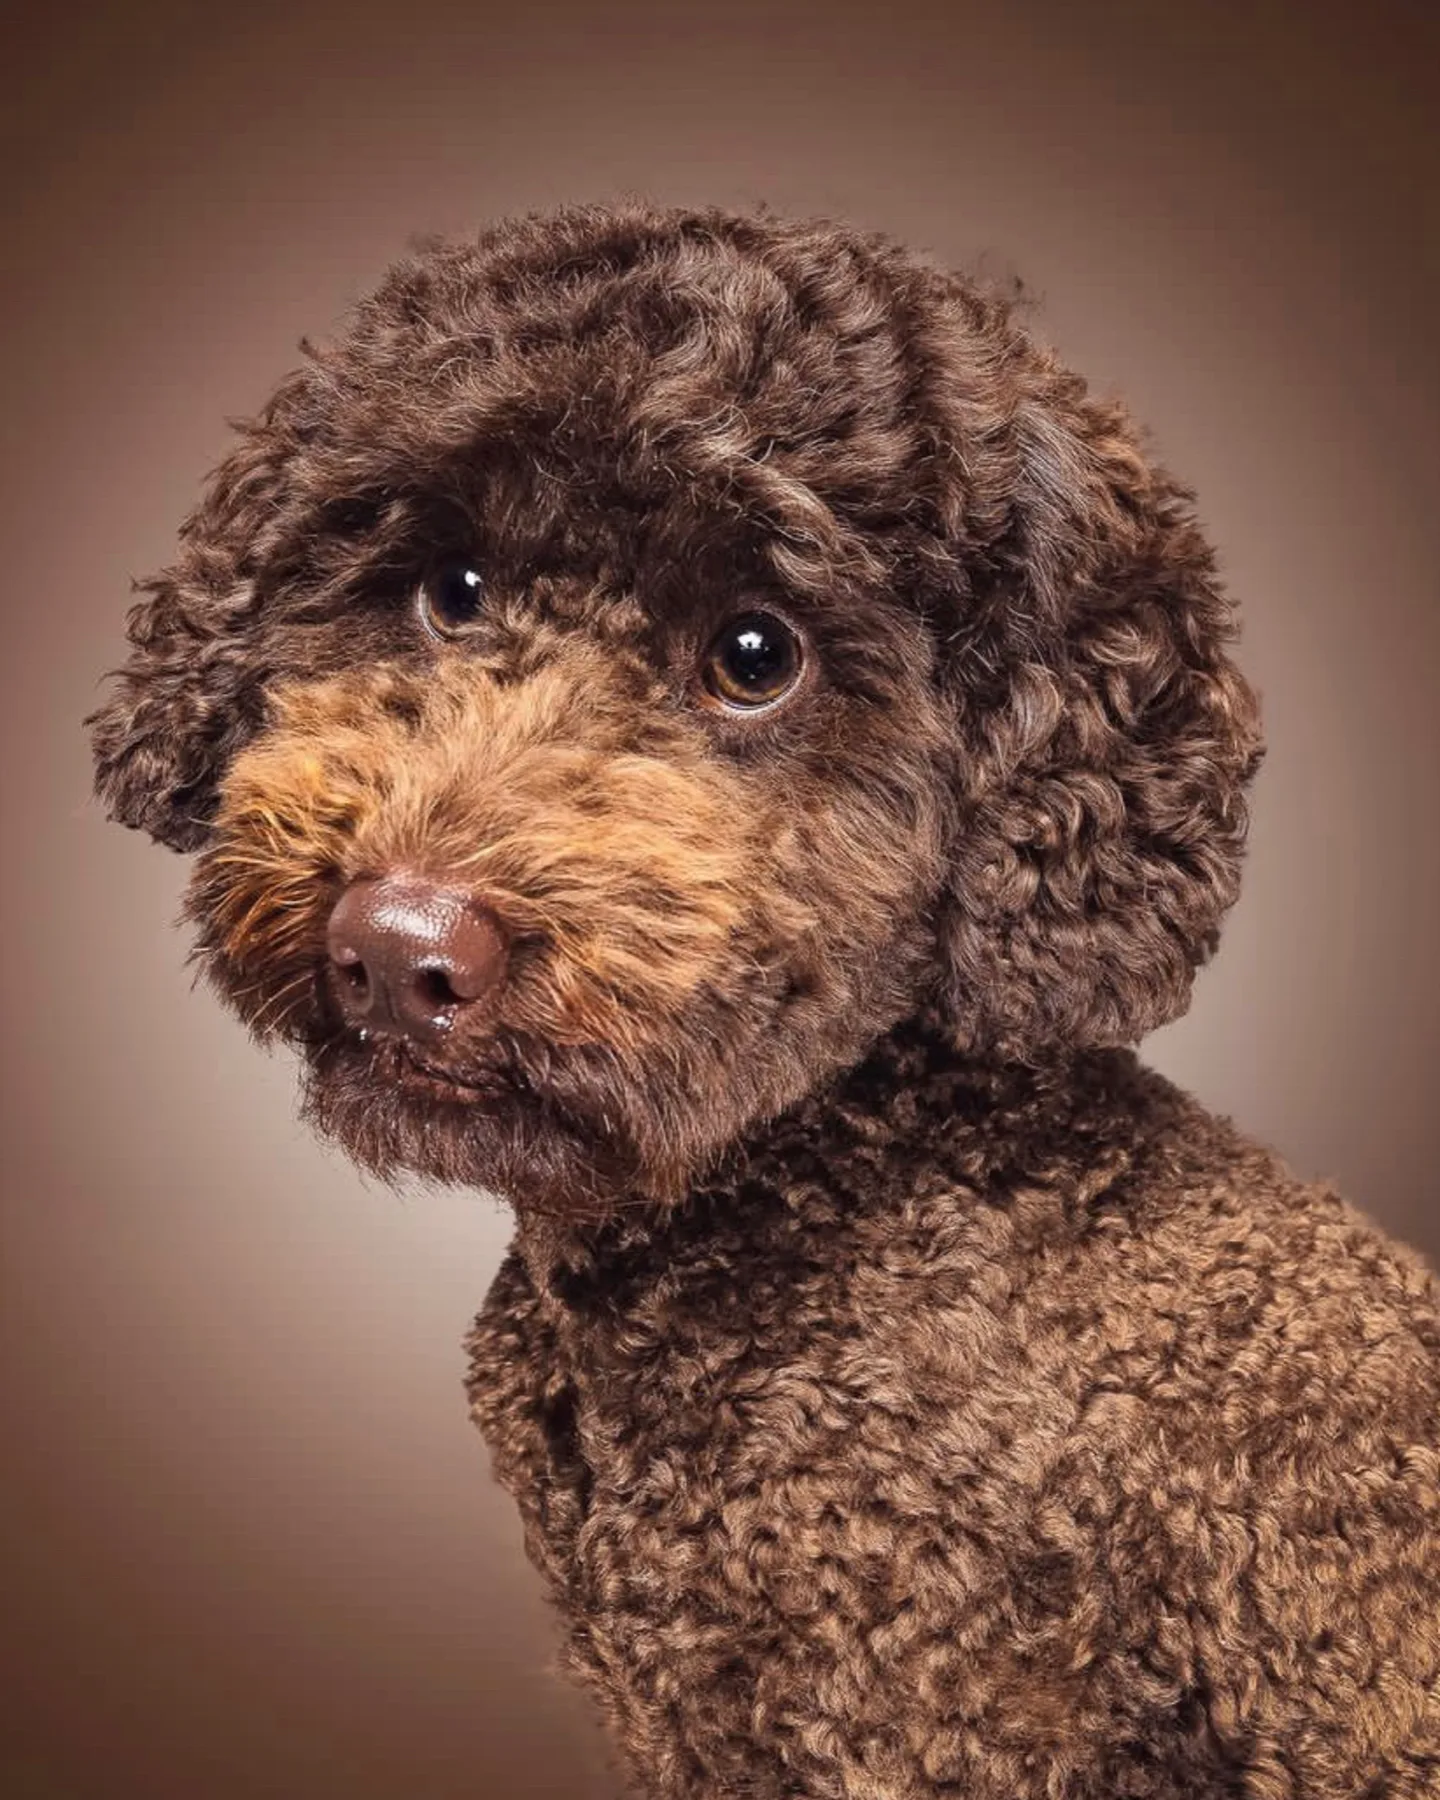 The Portrait of a beautiful brown Poodle